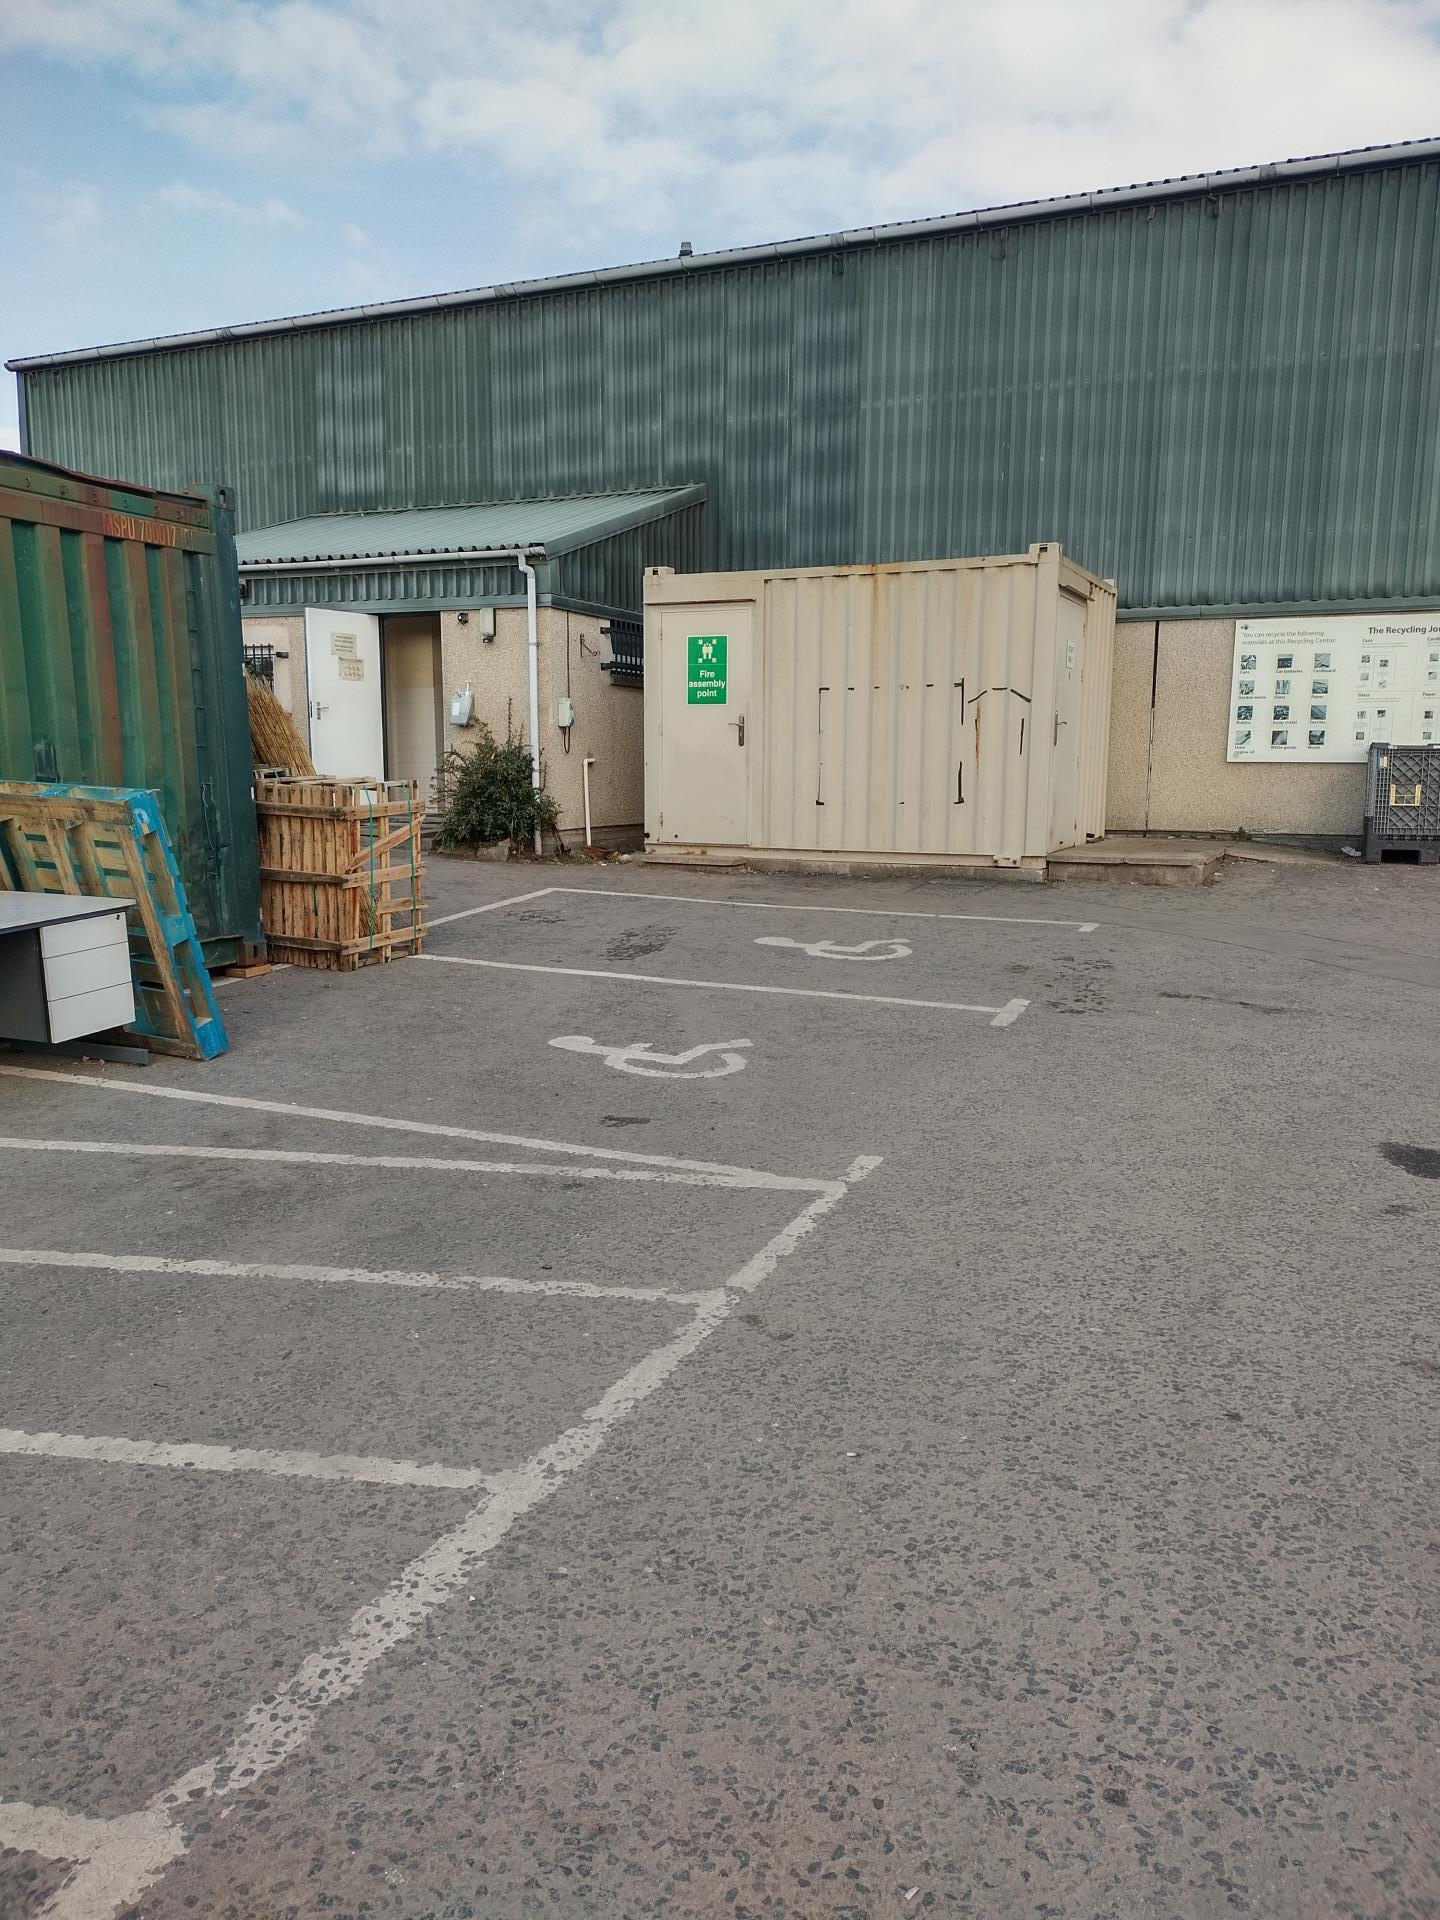 The pallets are not always there, they are awaiting delivery! If these spaces are full, please speak to staff and we'll help!